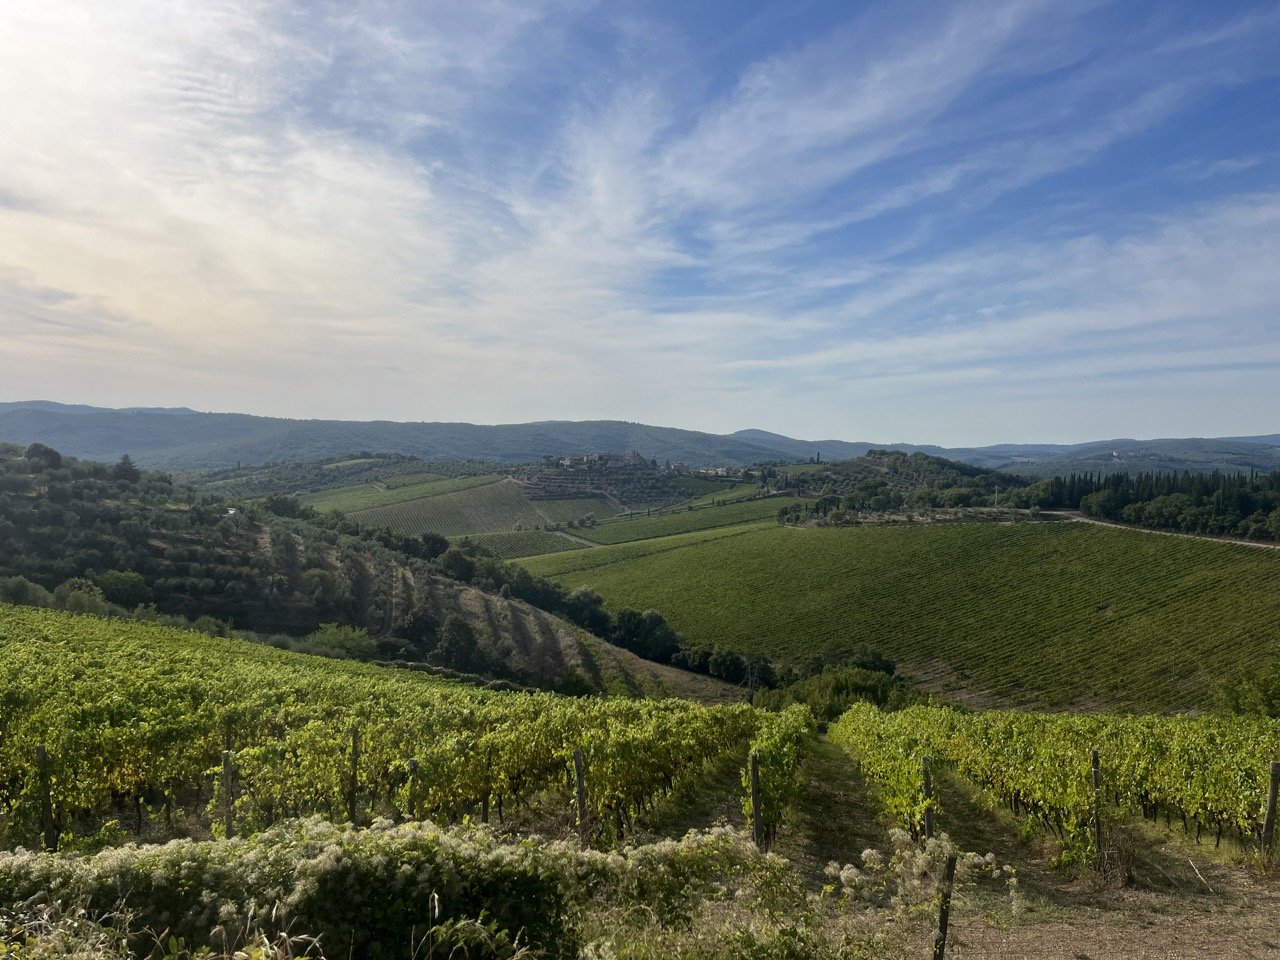 A view of vineyards and olive groves spread out over rolling hills in the Chianti countryside.